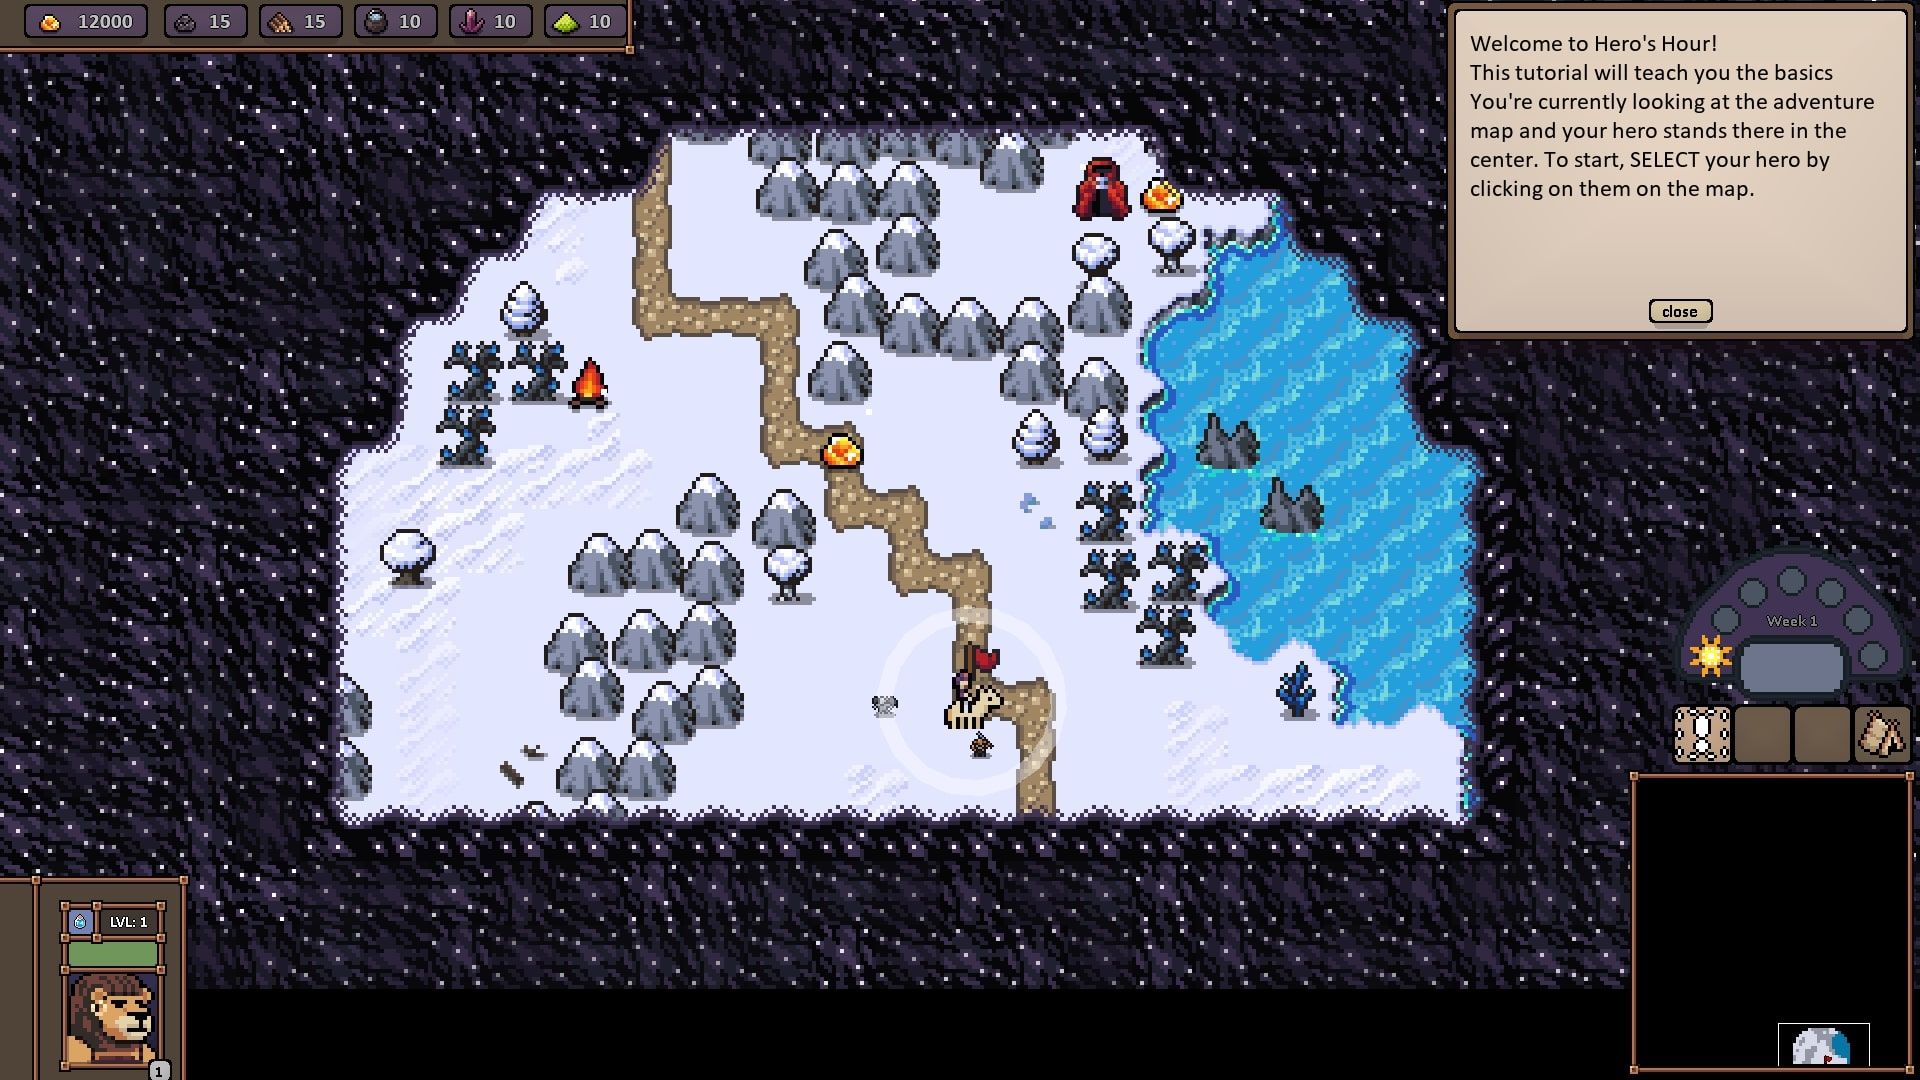 Hero's Hour Start of the tutorial in a snowy biome